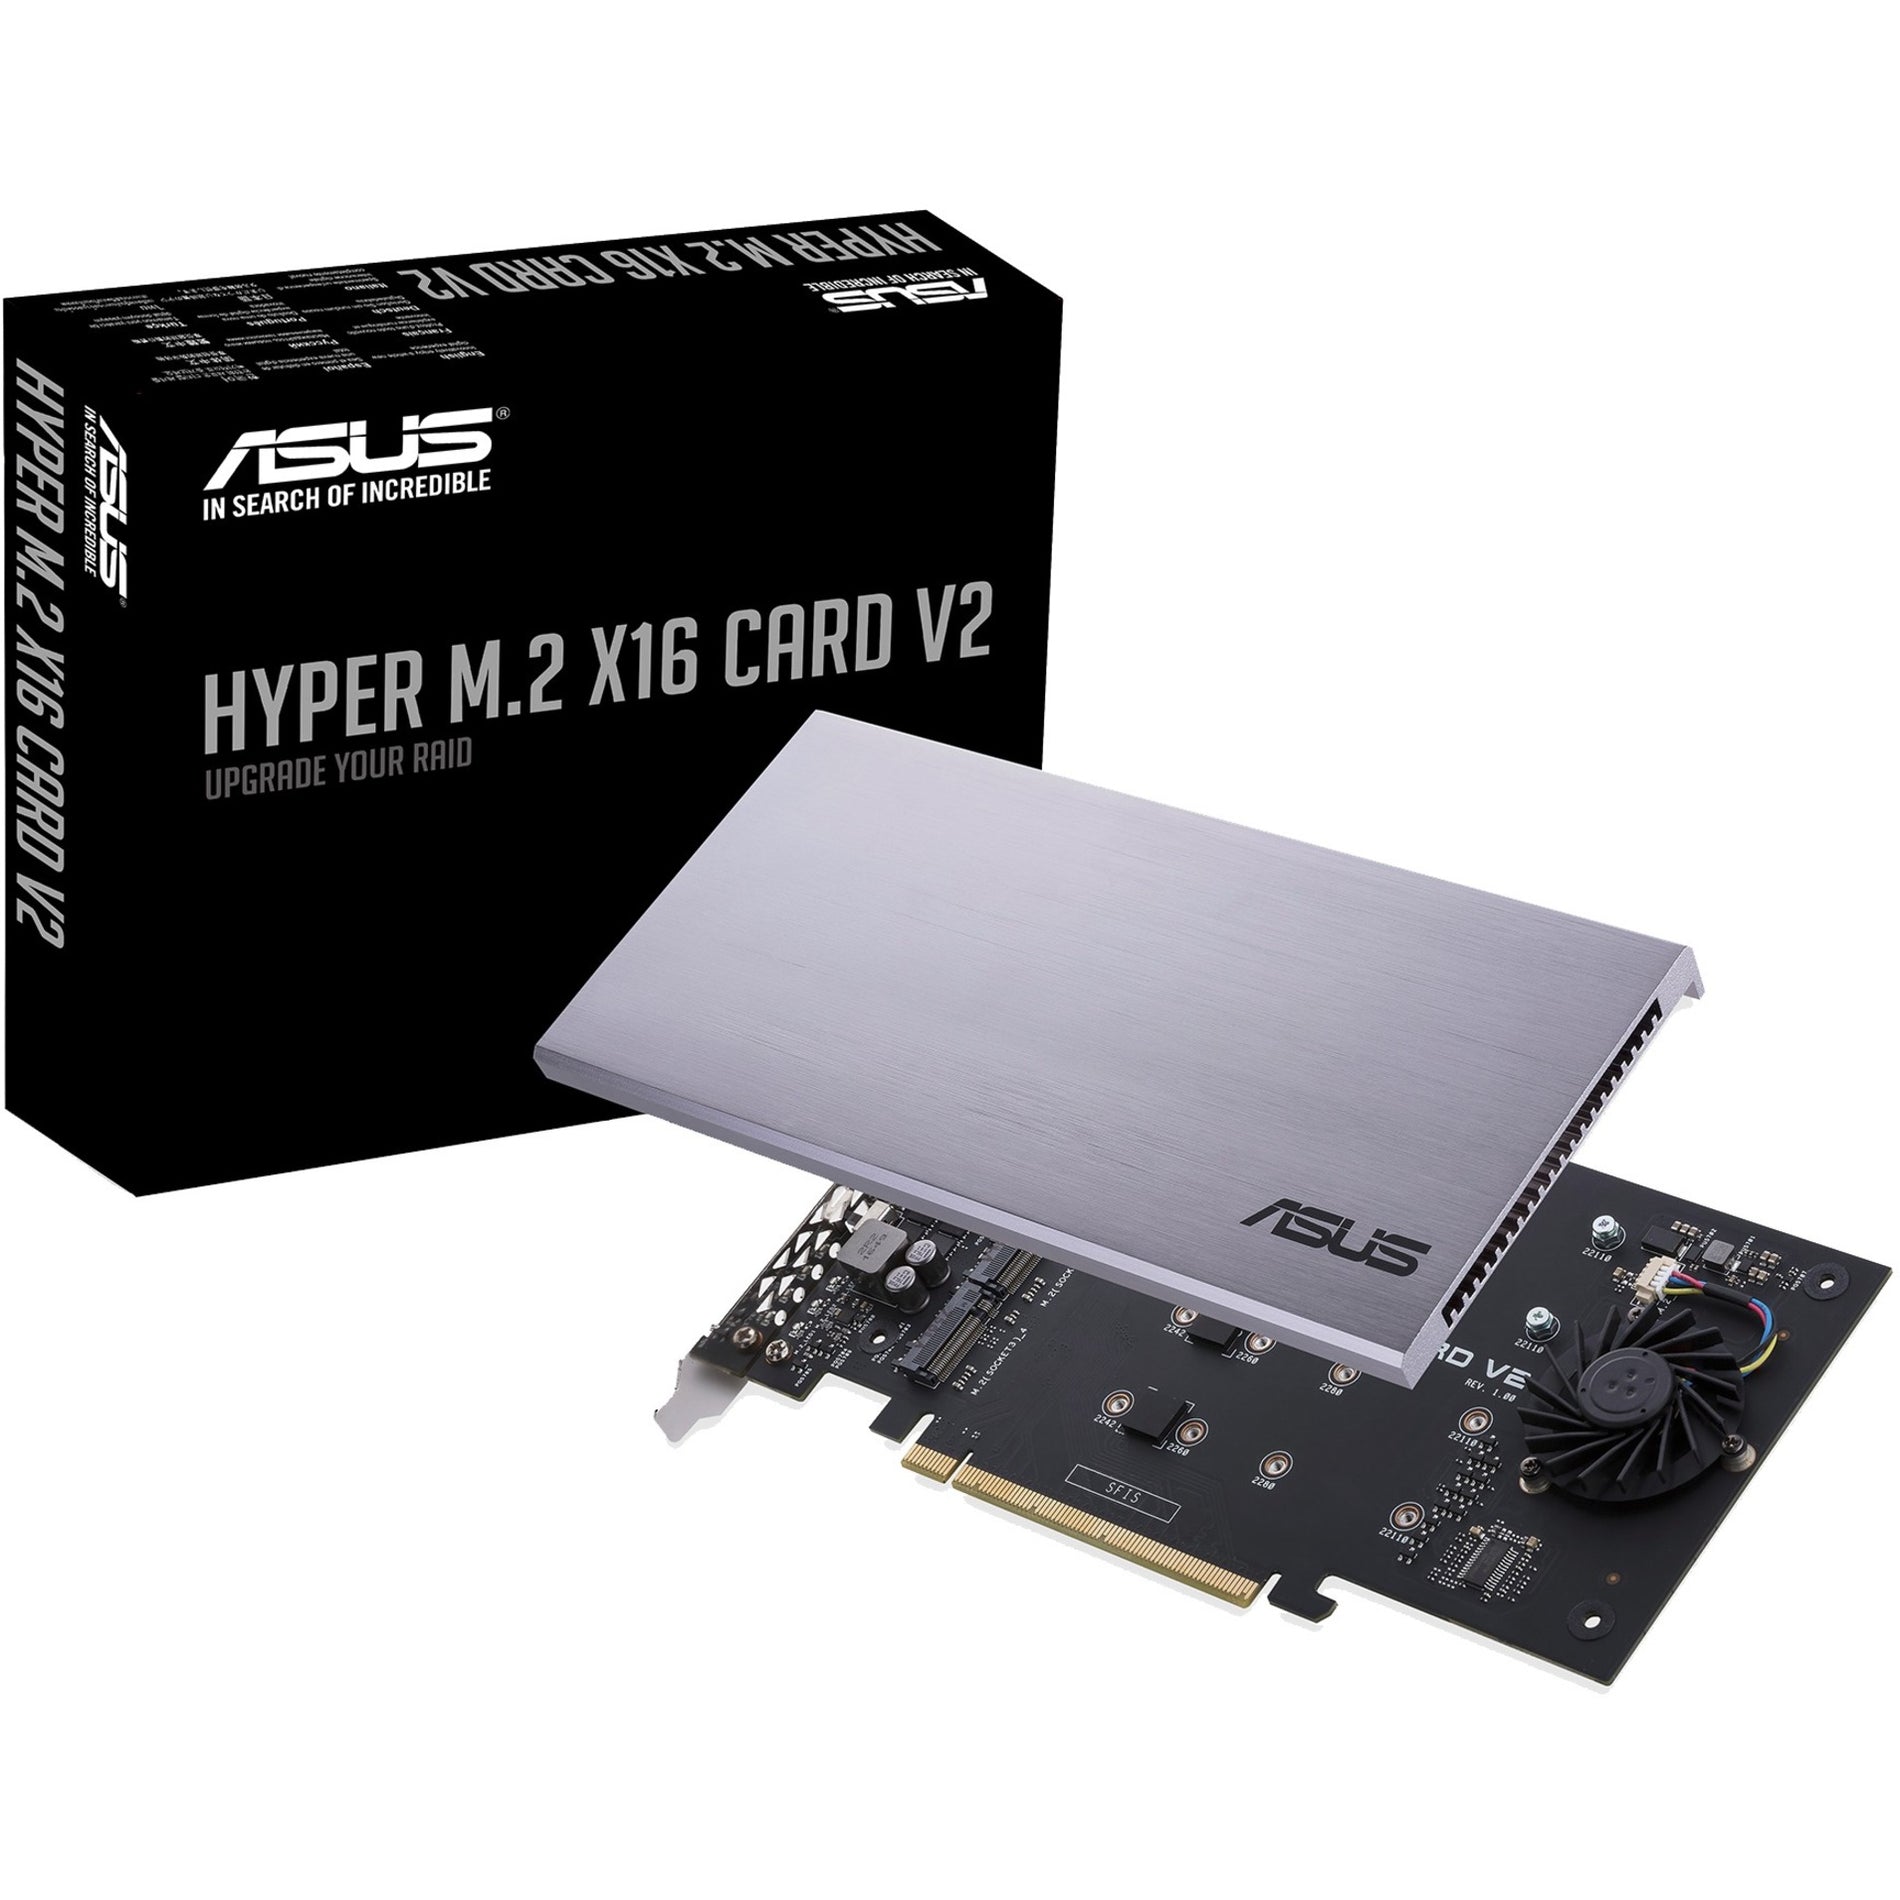 Asus HYPER M.2 X16 CARD V2 M.2 to PCI Express Adapter, High-Speed Data Transfer, LED Indicator, Intel VROC Ready